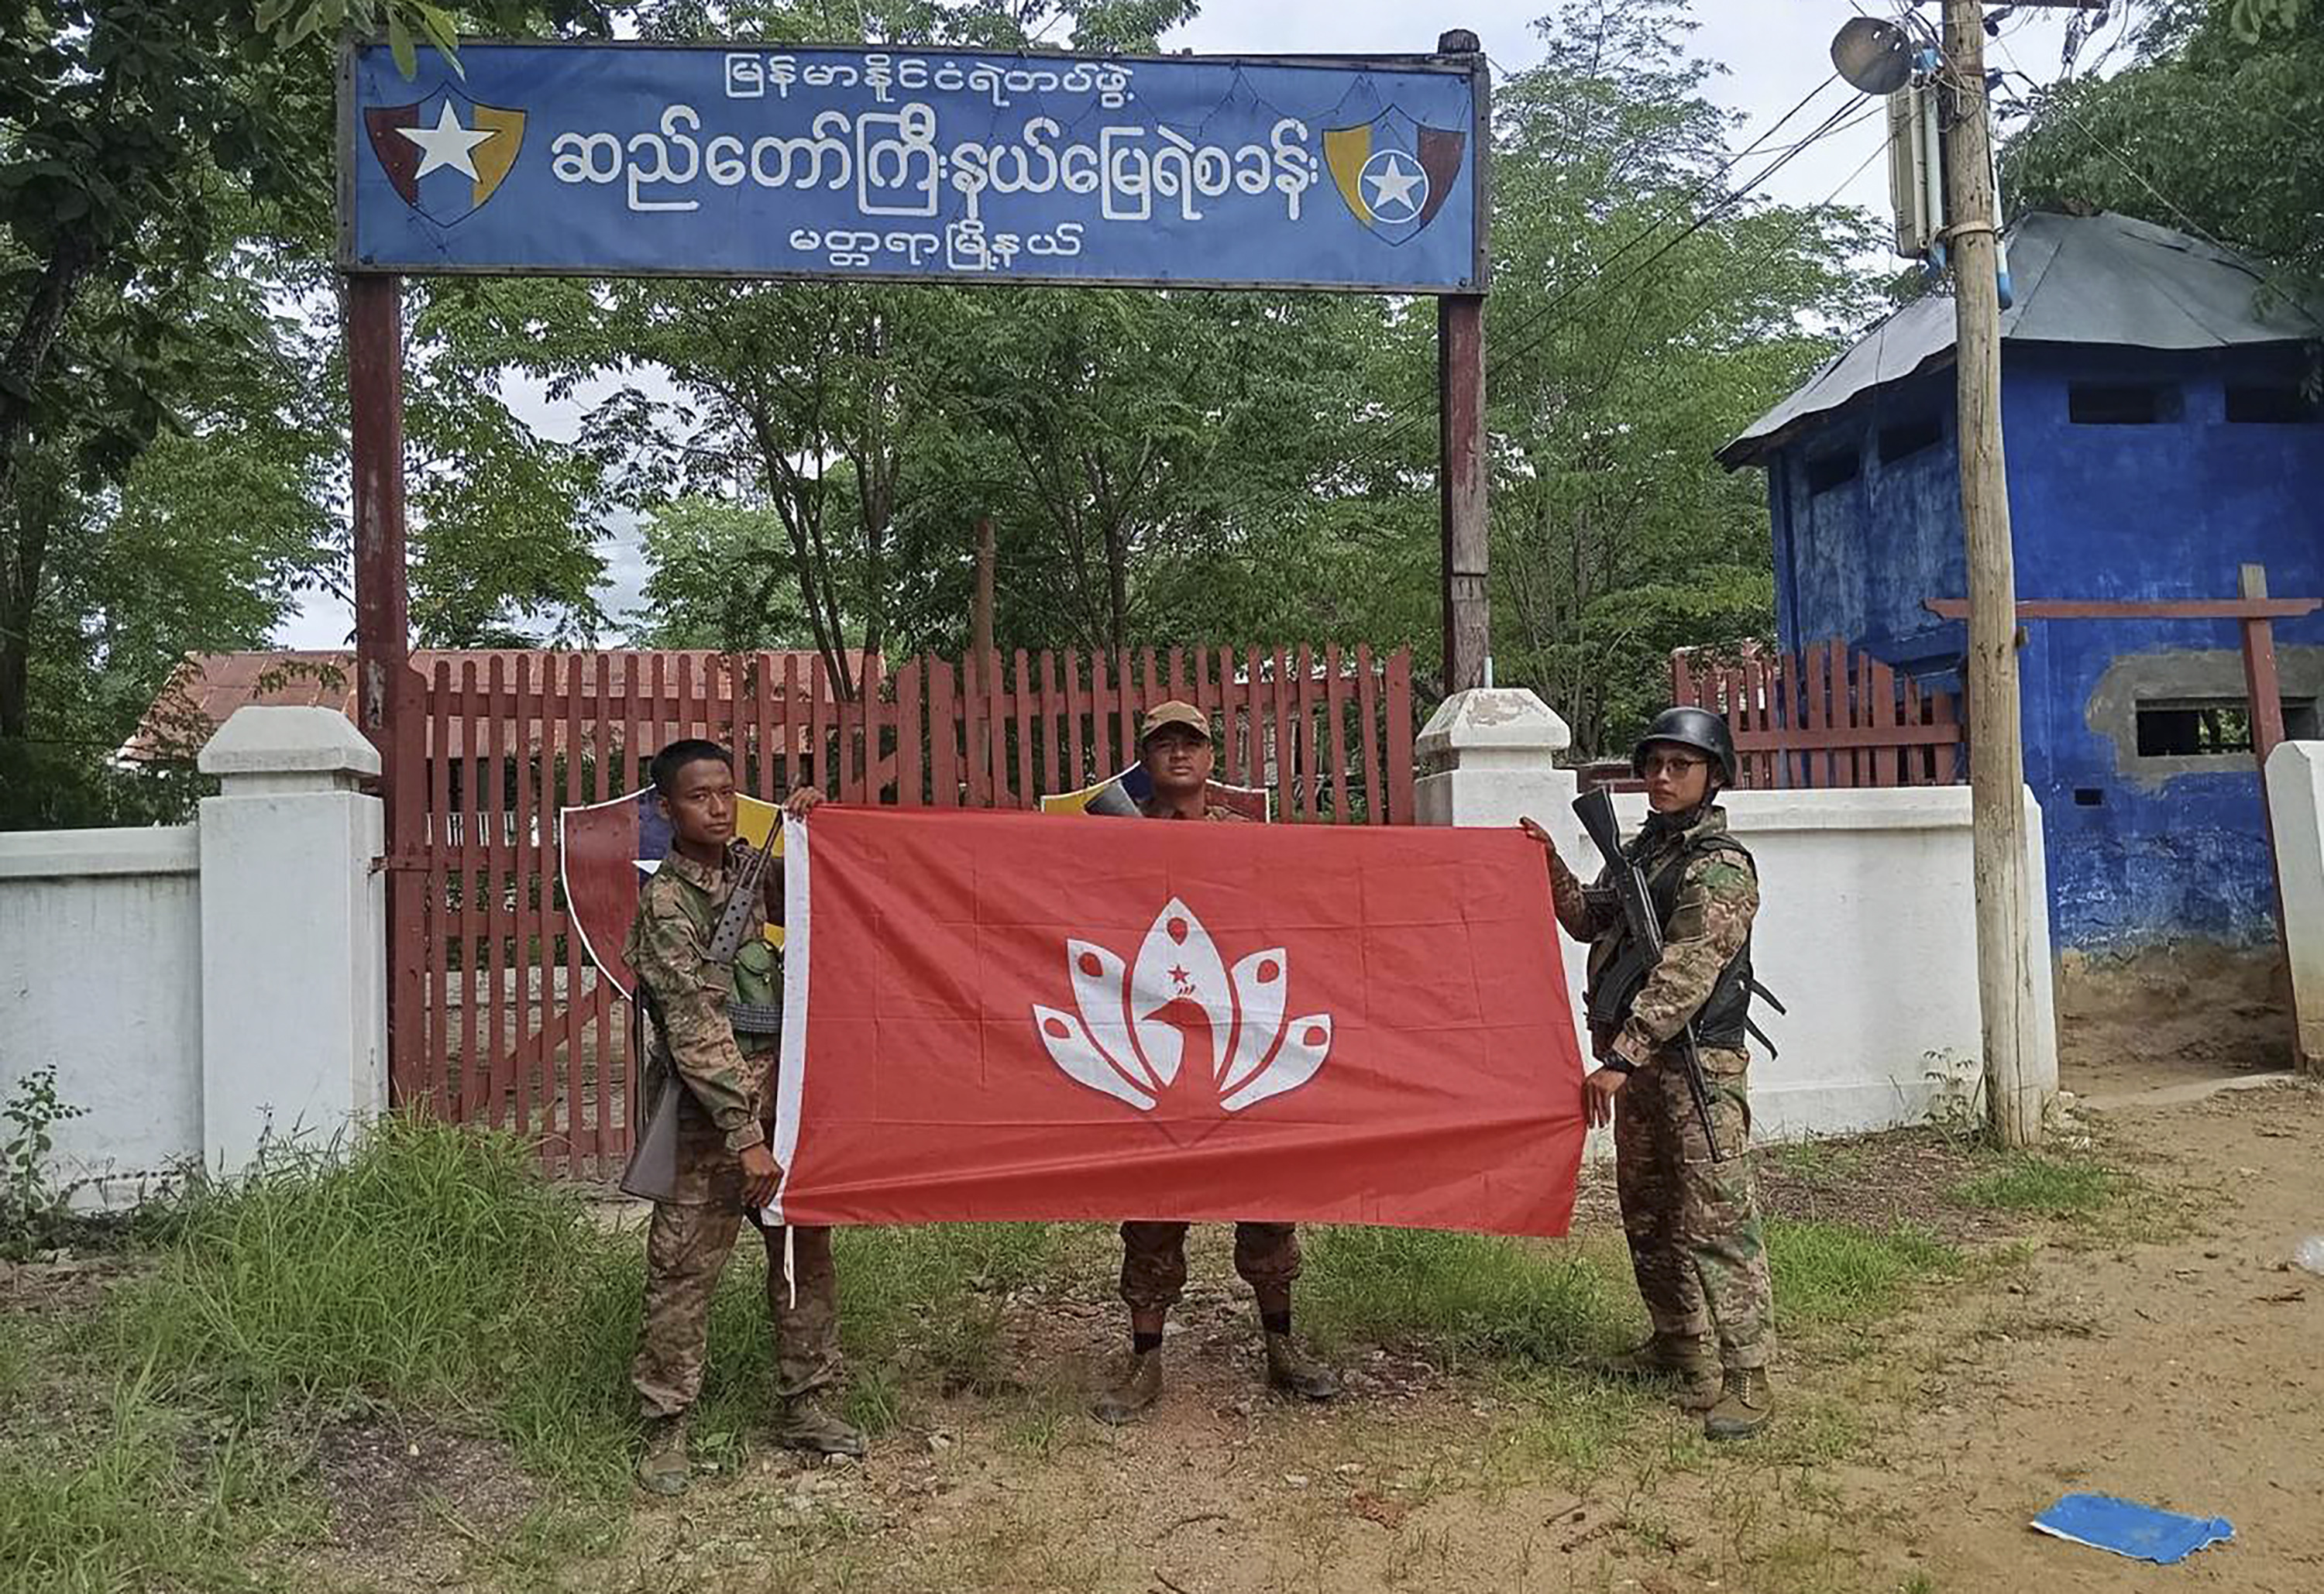 In this handout photo provided by Mandalay People's Defence Force, members of the Mandalay People's Defence Force pose for a photograph with the group's flag in front of the captured police station in Madaya township in Mandalay region, Myanmar, July 2, 2024. New fighting has broken out in northeastern Myanmar, bringing an end to a Chinese-brokered cease-fire and putting pressure on the military regime as it faces attacks from resistance forces on multiple fronts in the country's civil war. (Mandalay People's Defence Force via AP)